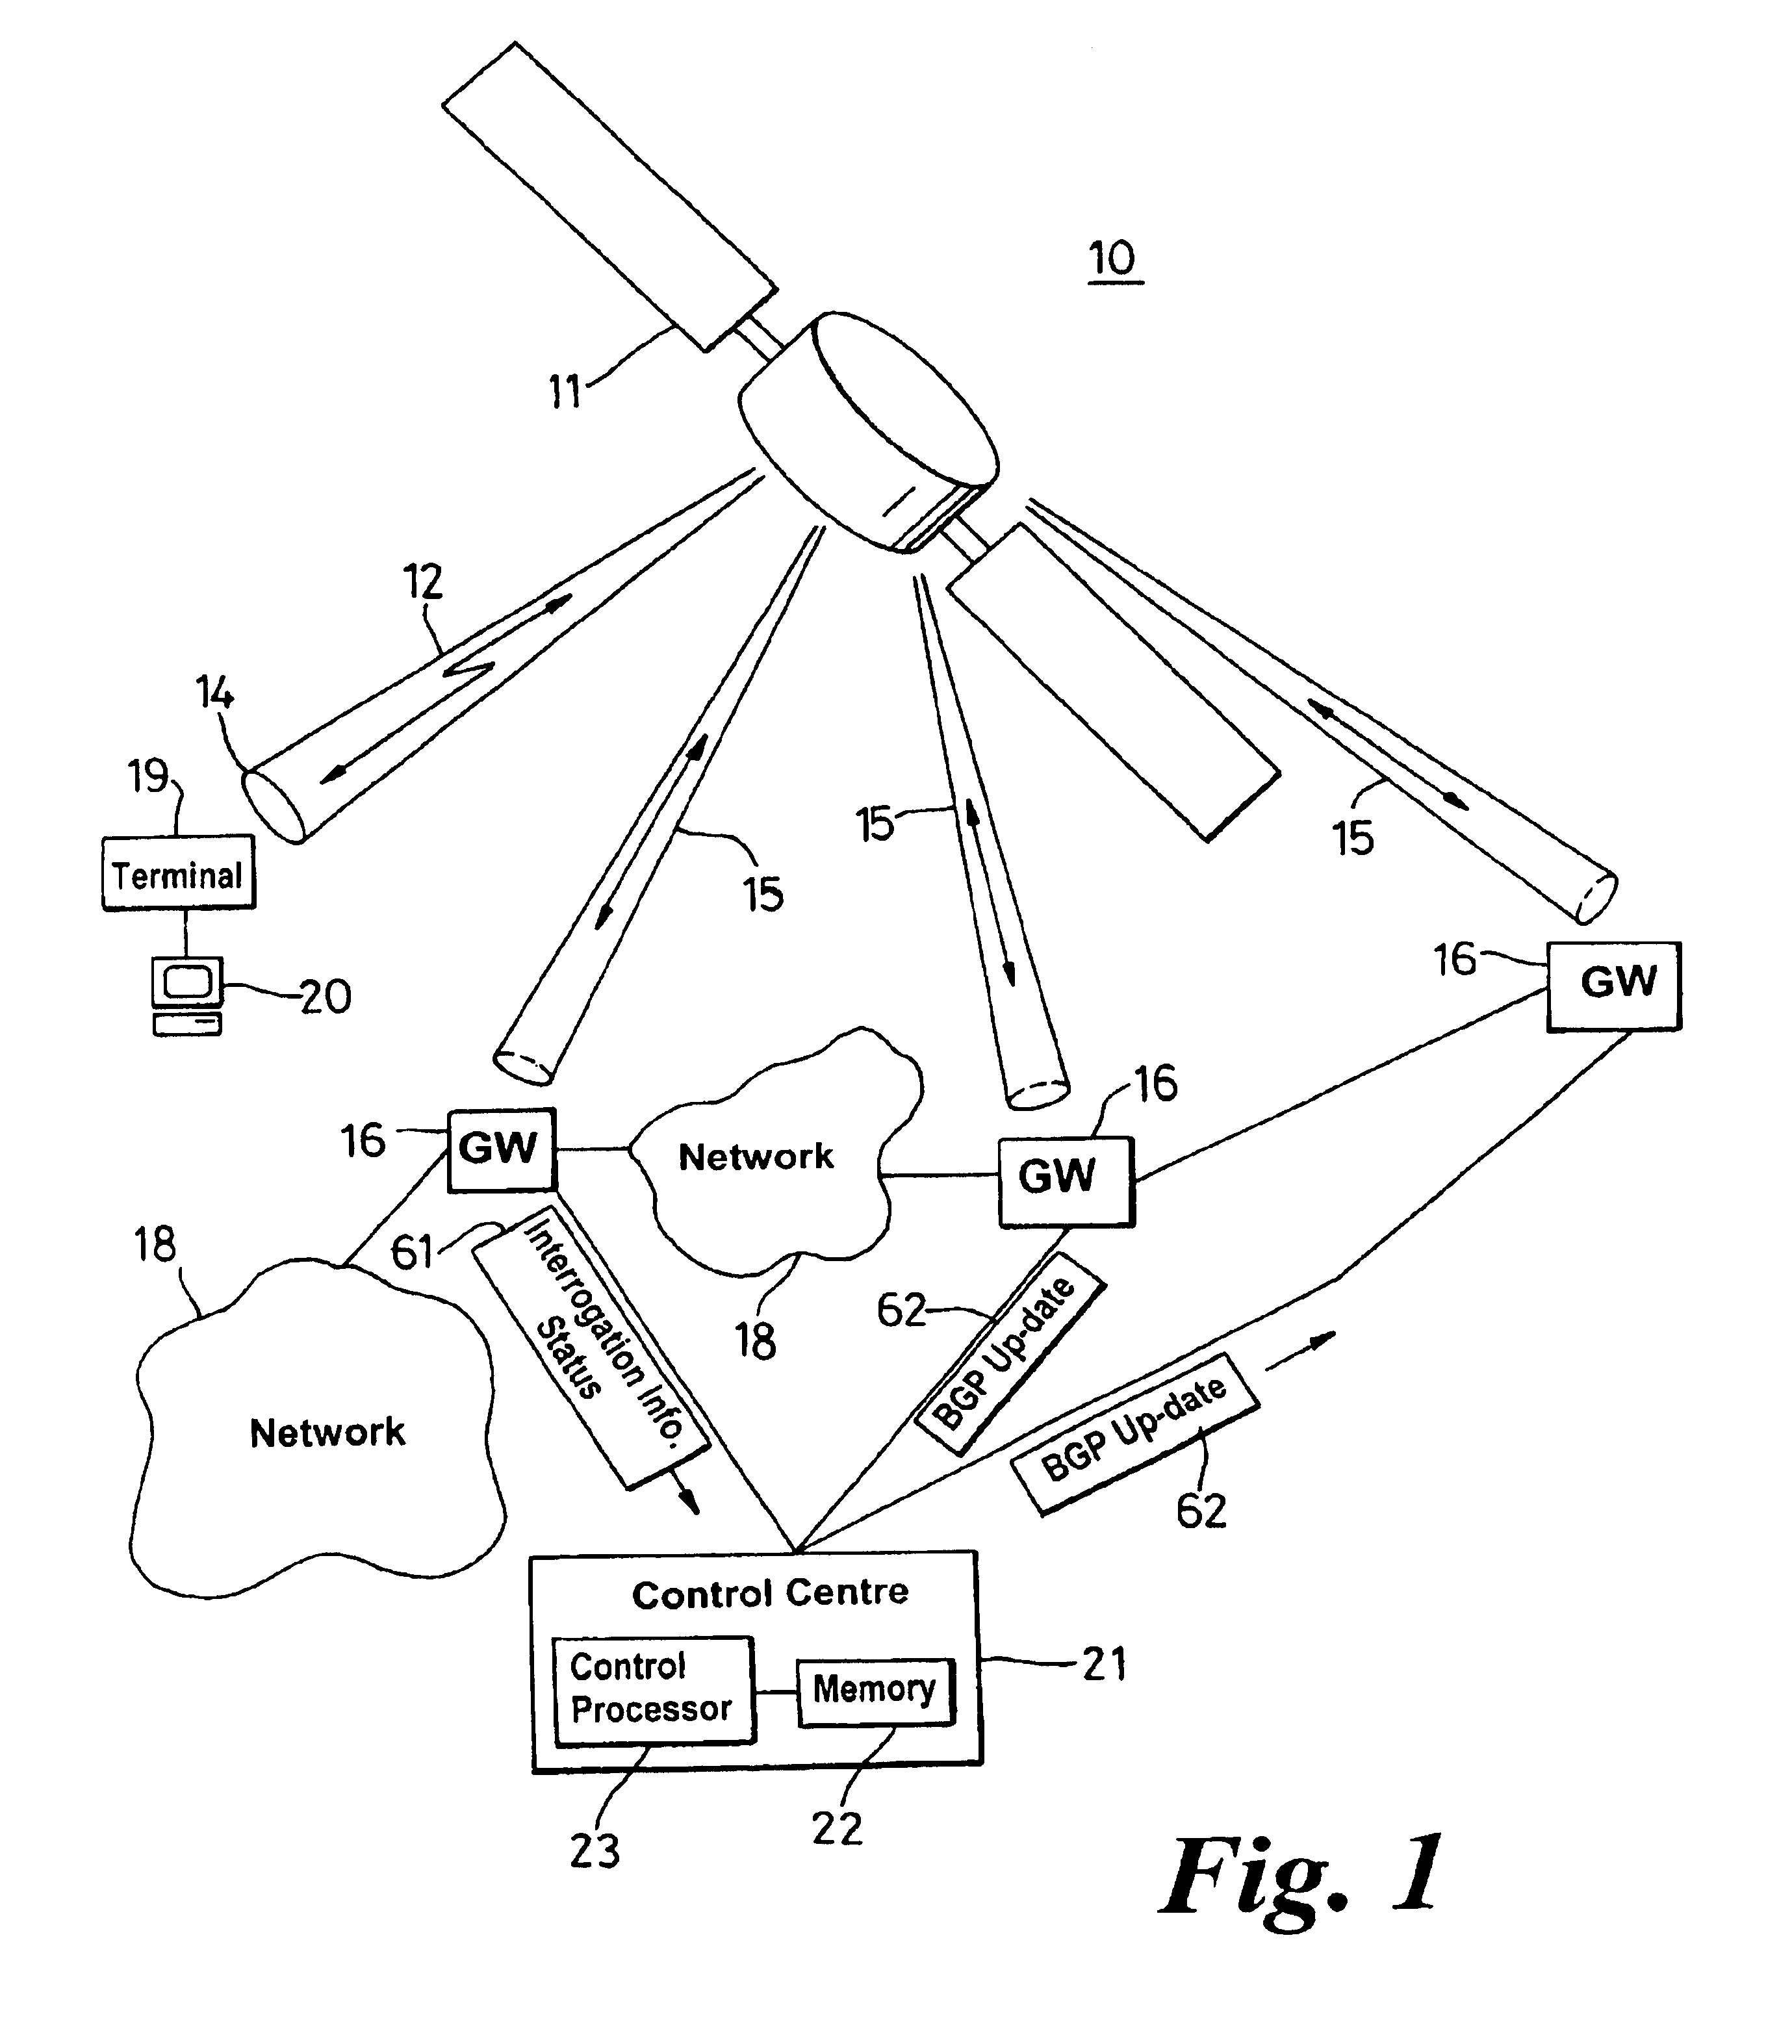 Border gateway protocol manager and method of managing the selection of communication links